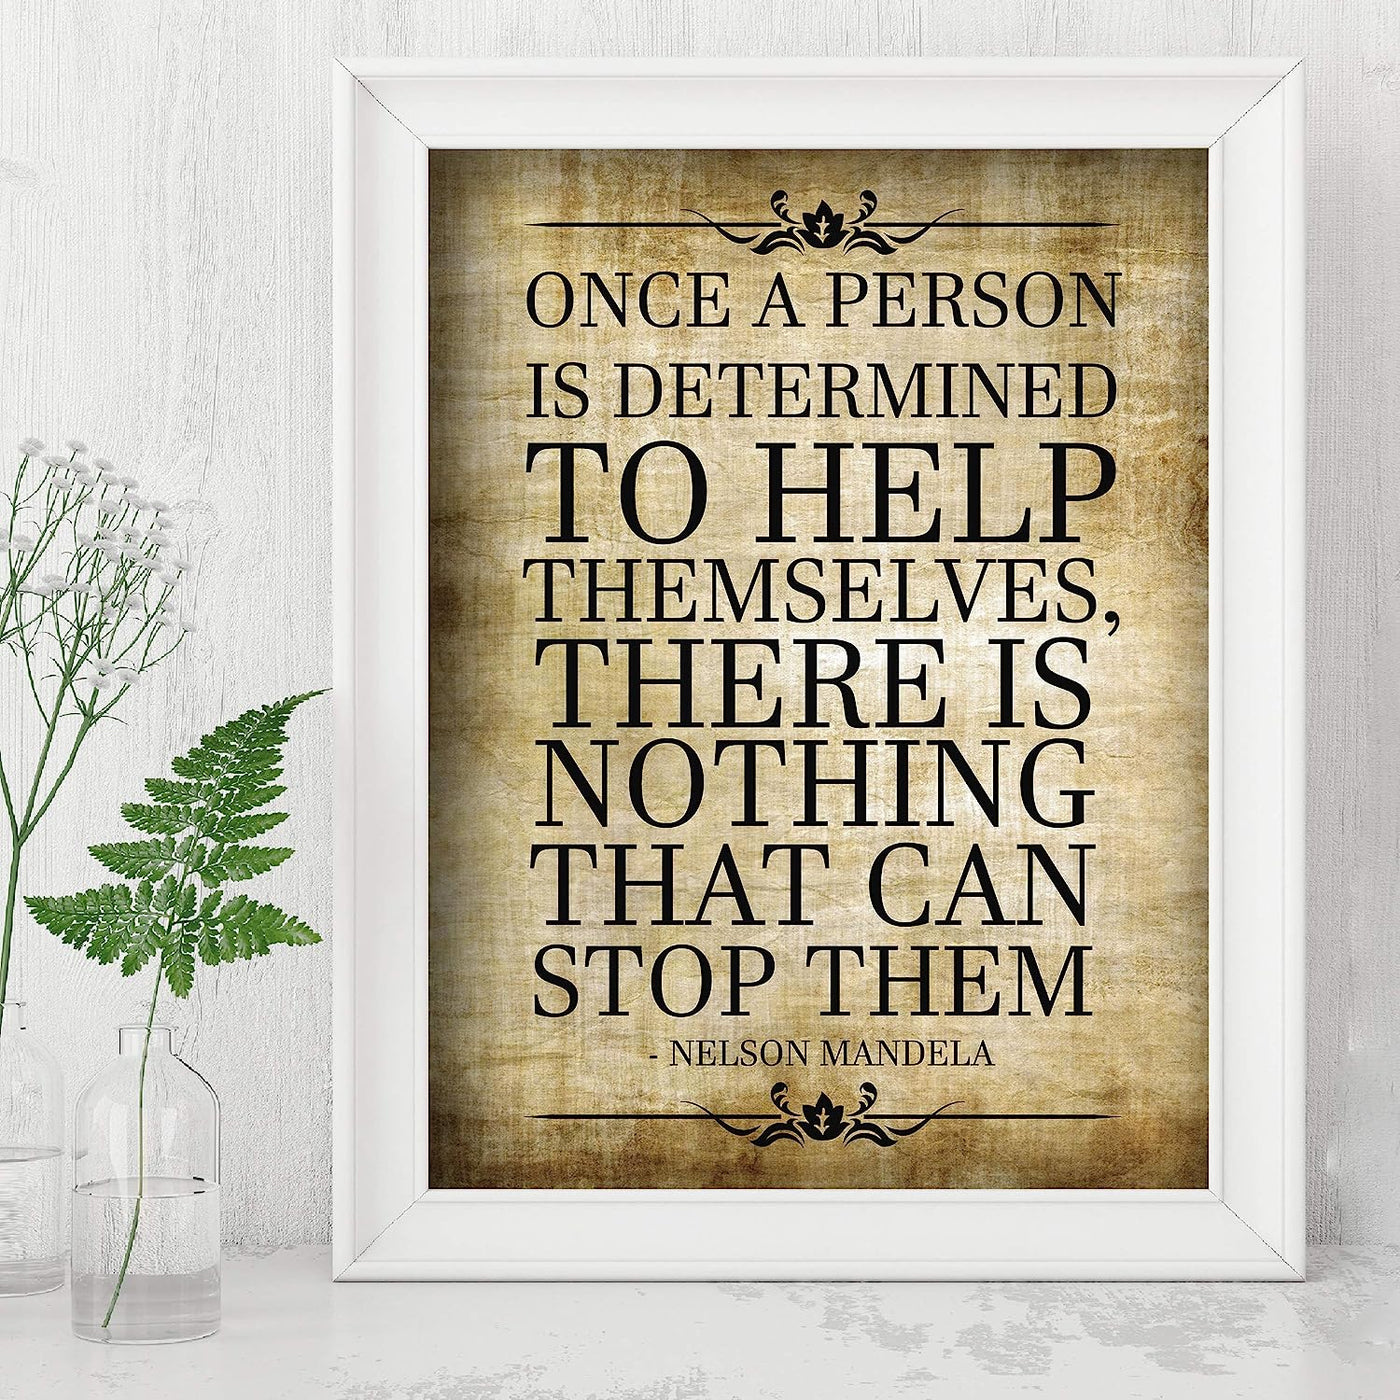 Mandela Quotes Wall Art- ?Once a Person Is Determined To Help Self-No Stopping Them?- 8 x 10" Wall Print-Ready to Frame. Modern Home-Office-School D?cor. Perfect Gift for Motivation & Inspiration.